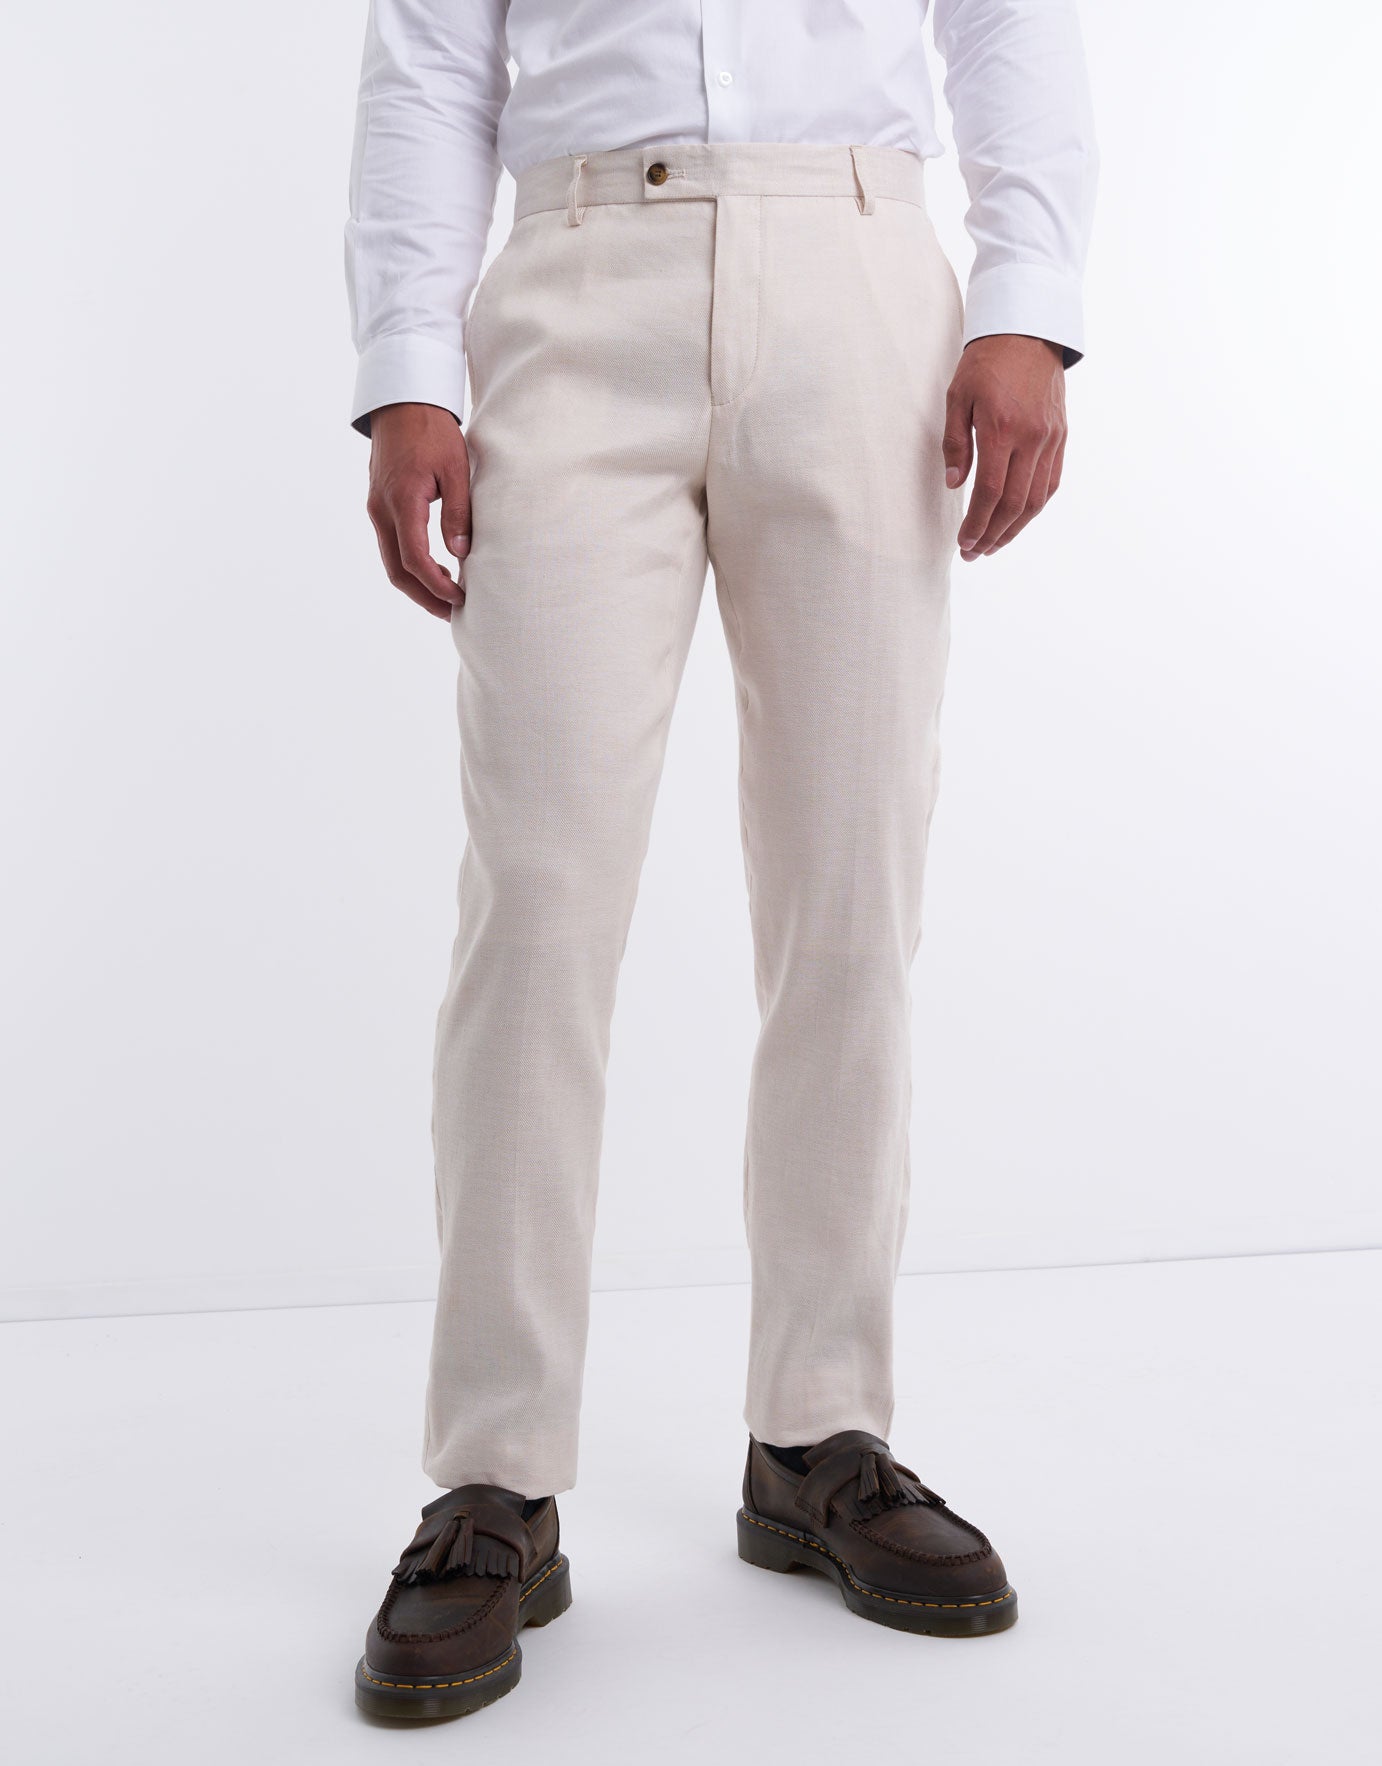 Ted Baker Lancet Slim Fit Wool Linen Trousers, Navy at John Lewis & Partners